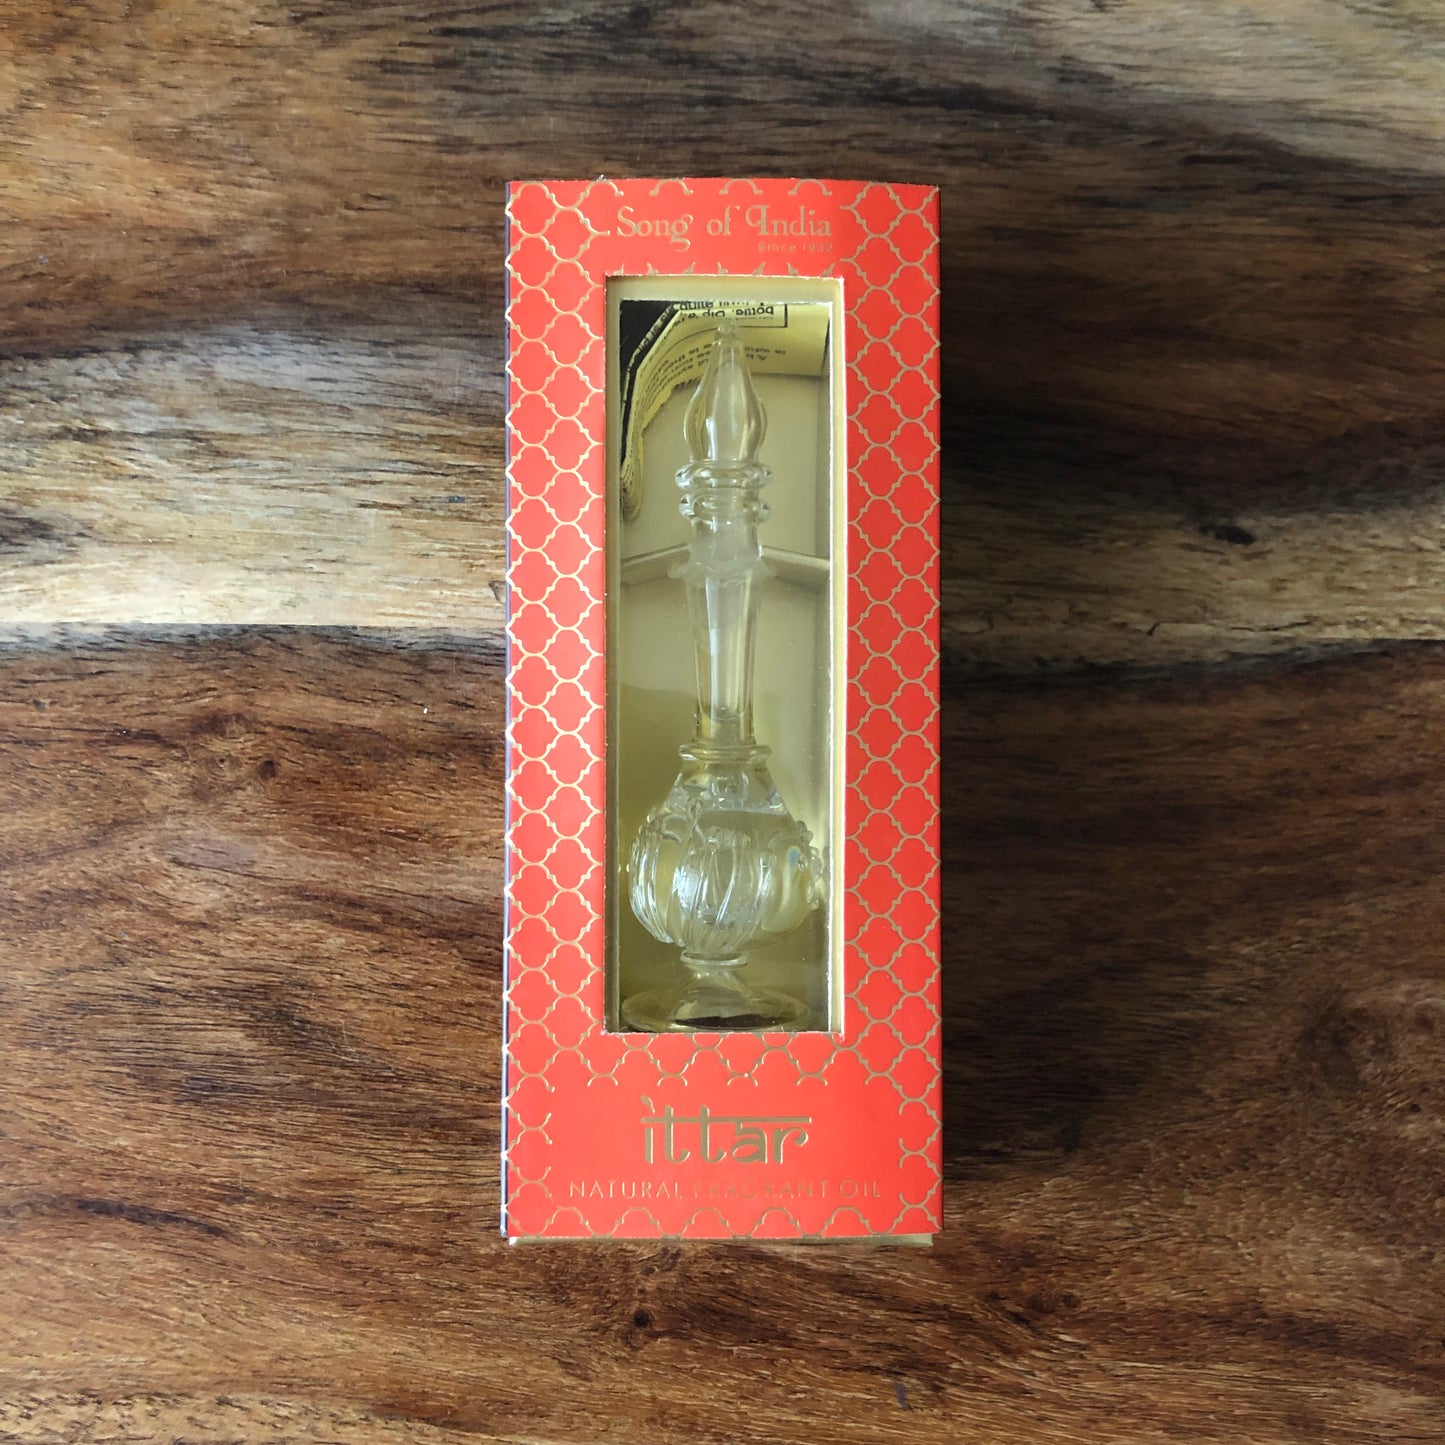 Song of India Natural Fragrant Oil  Buddha delight 5ml